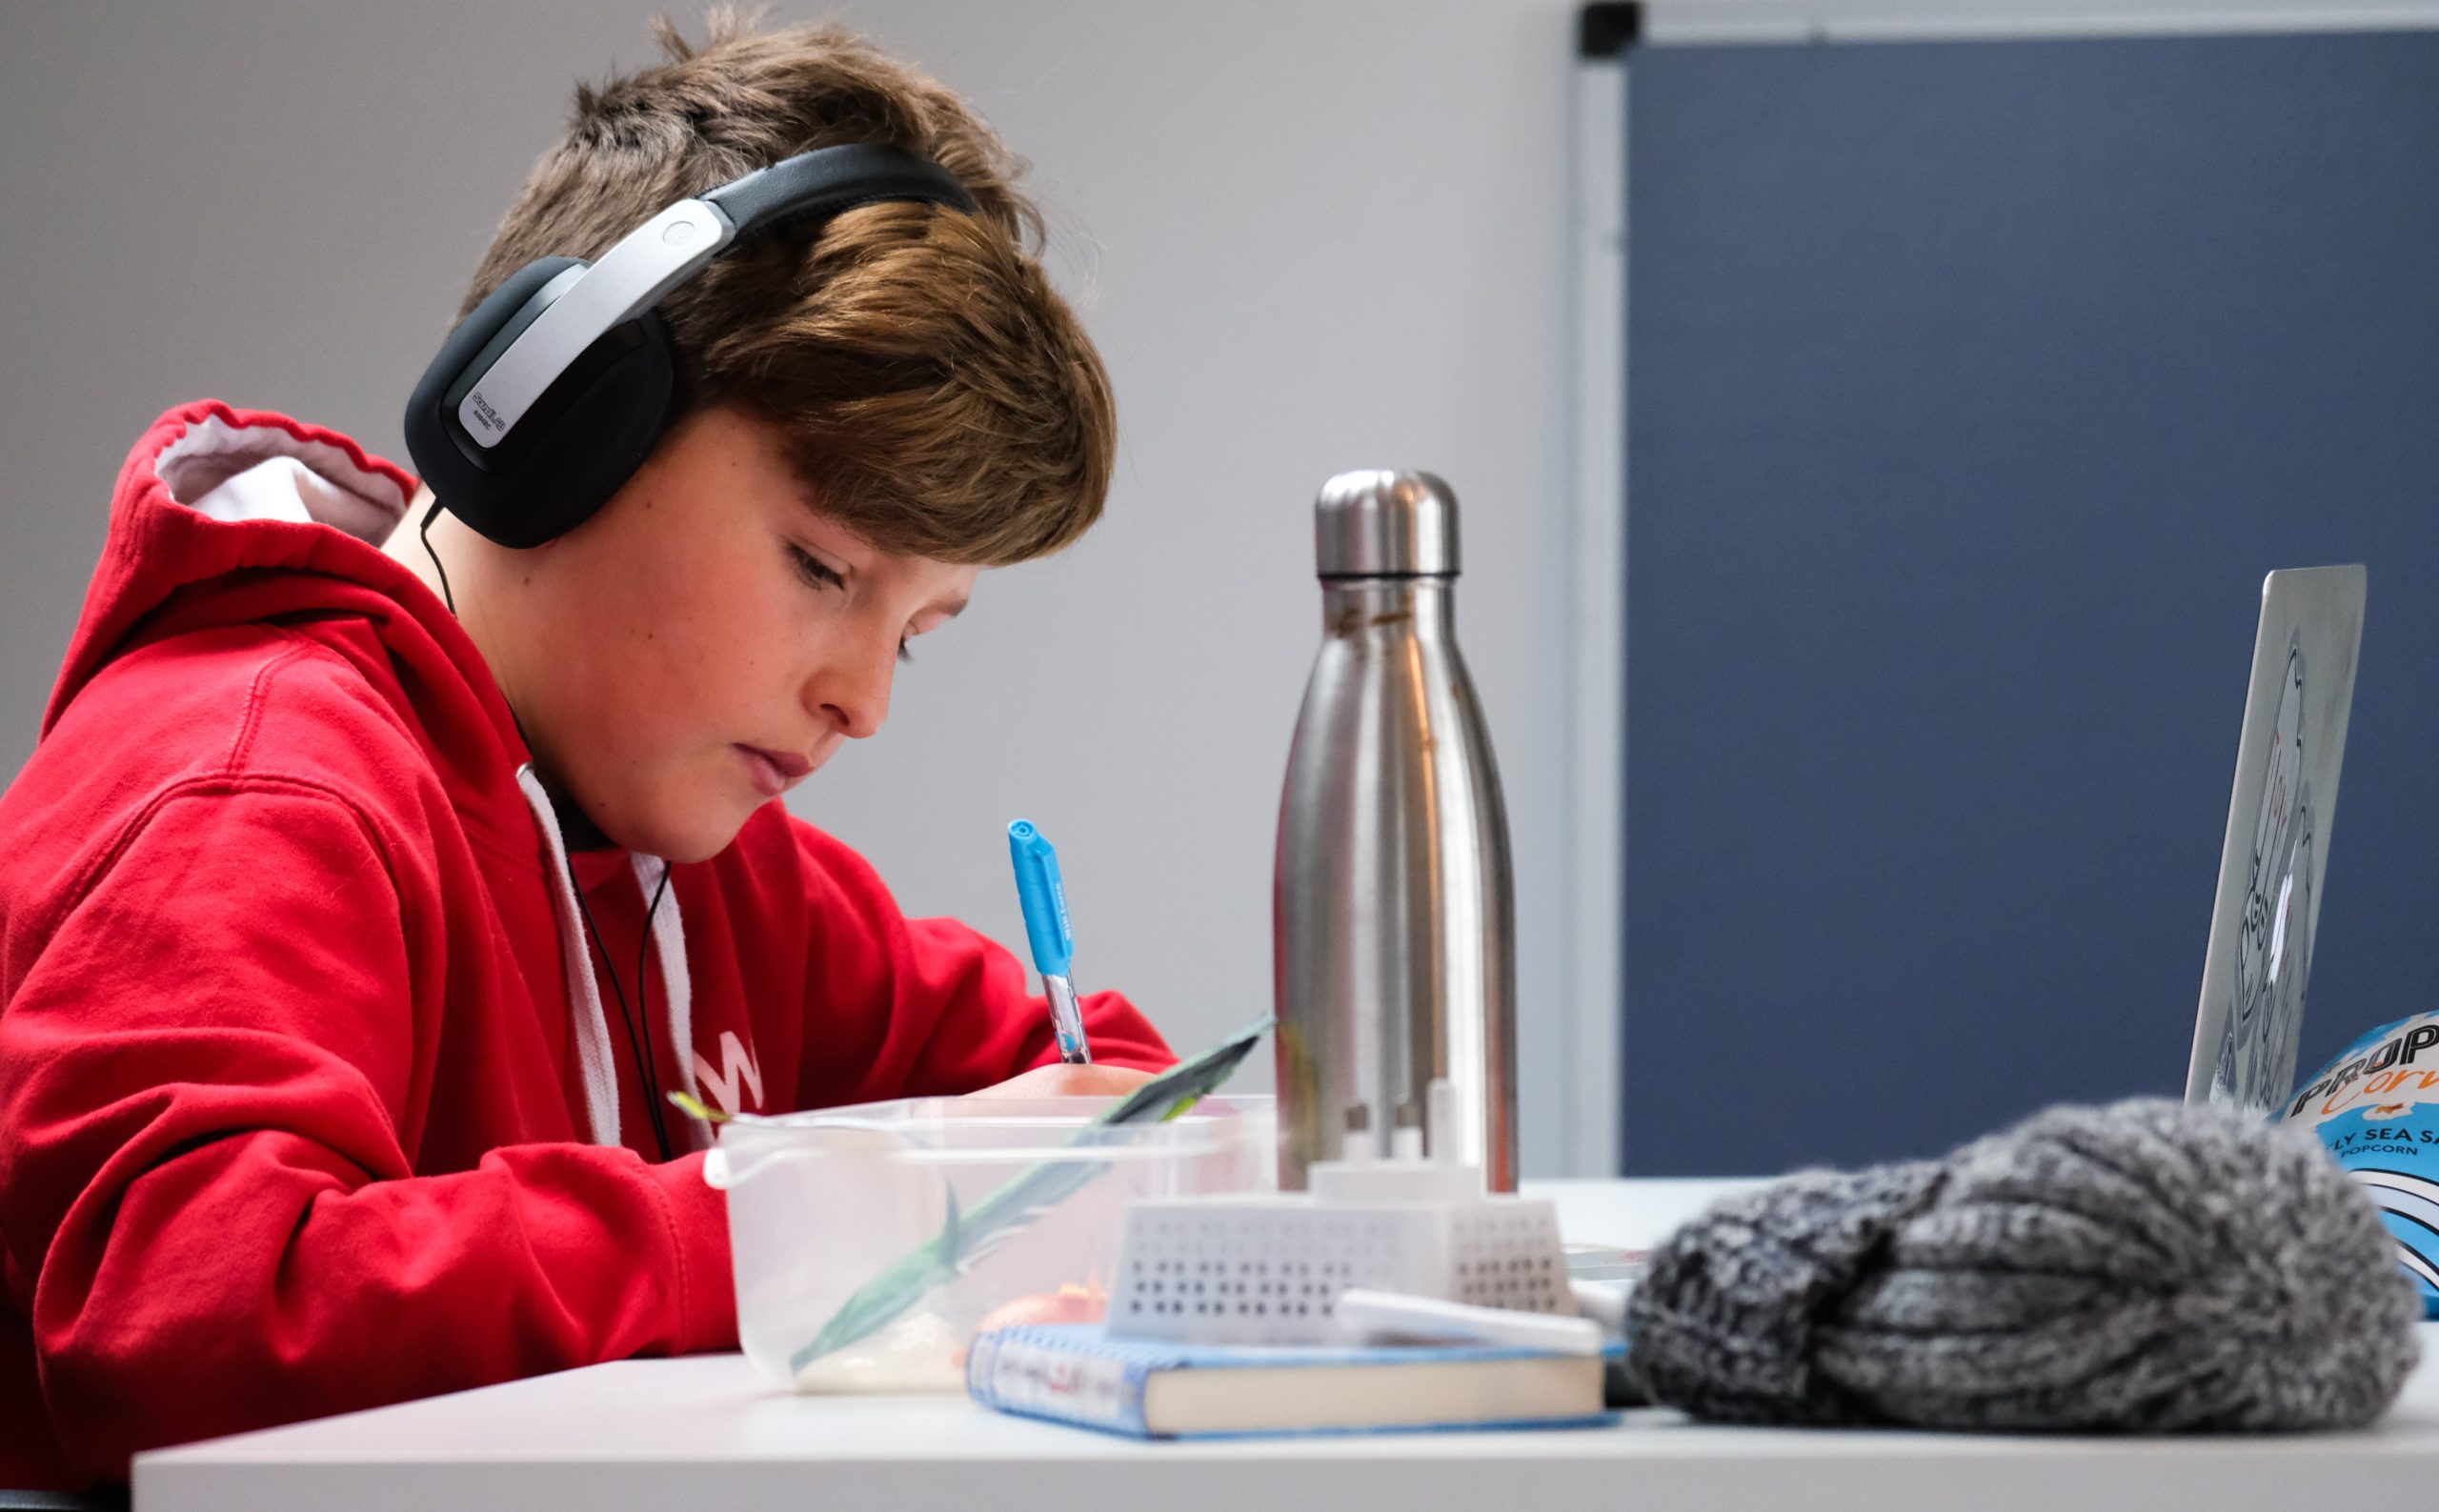 LearnOnline news article - what is an IGCSE? 12-14 year old boy in red jumper sat at desk studying with headphones